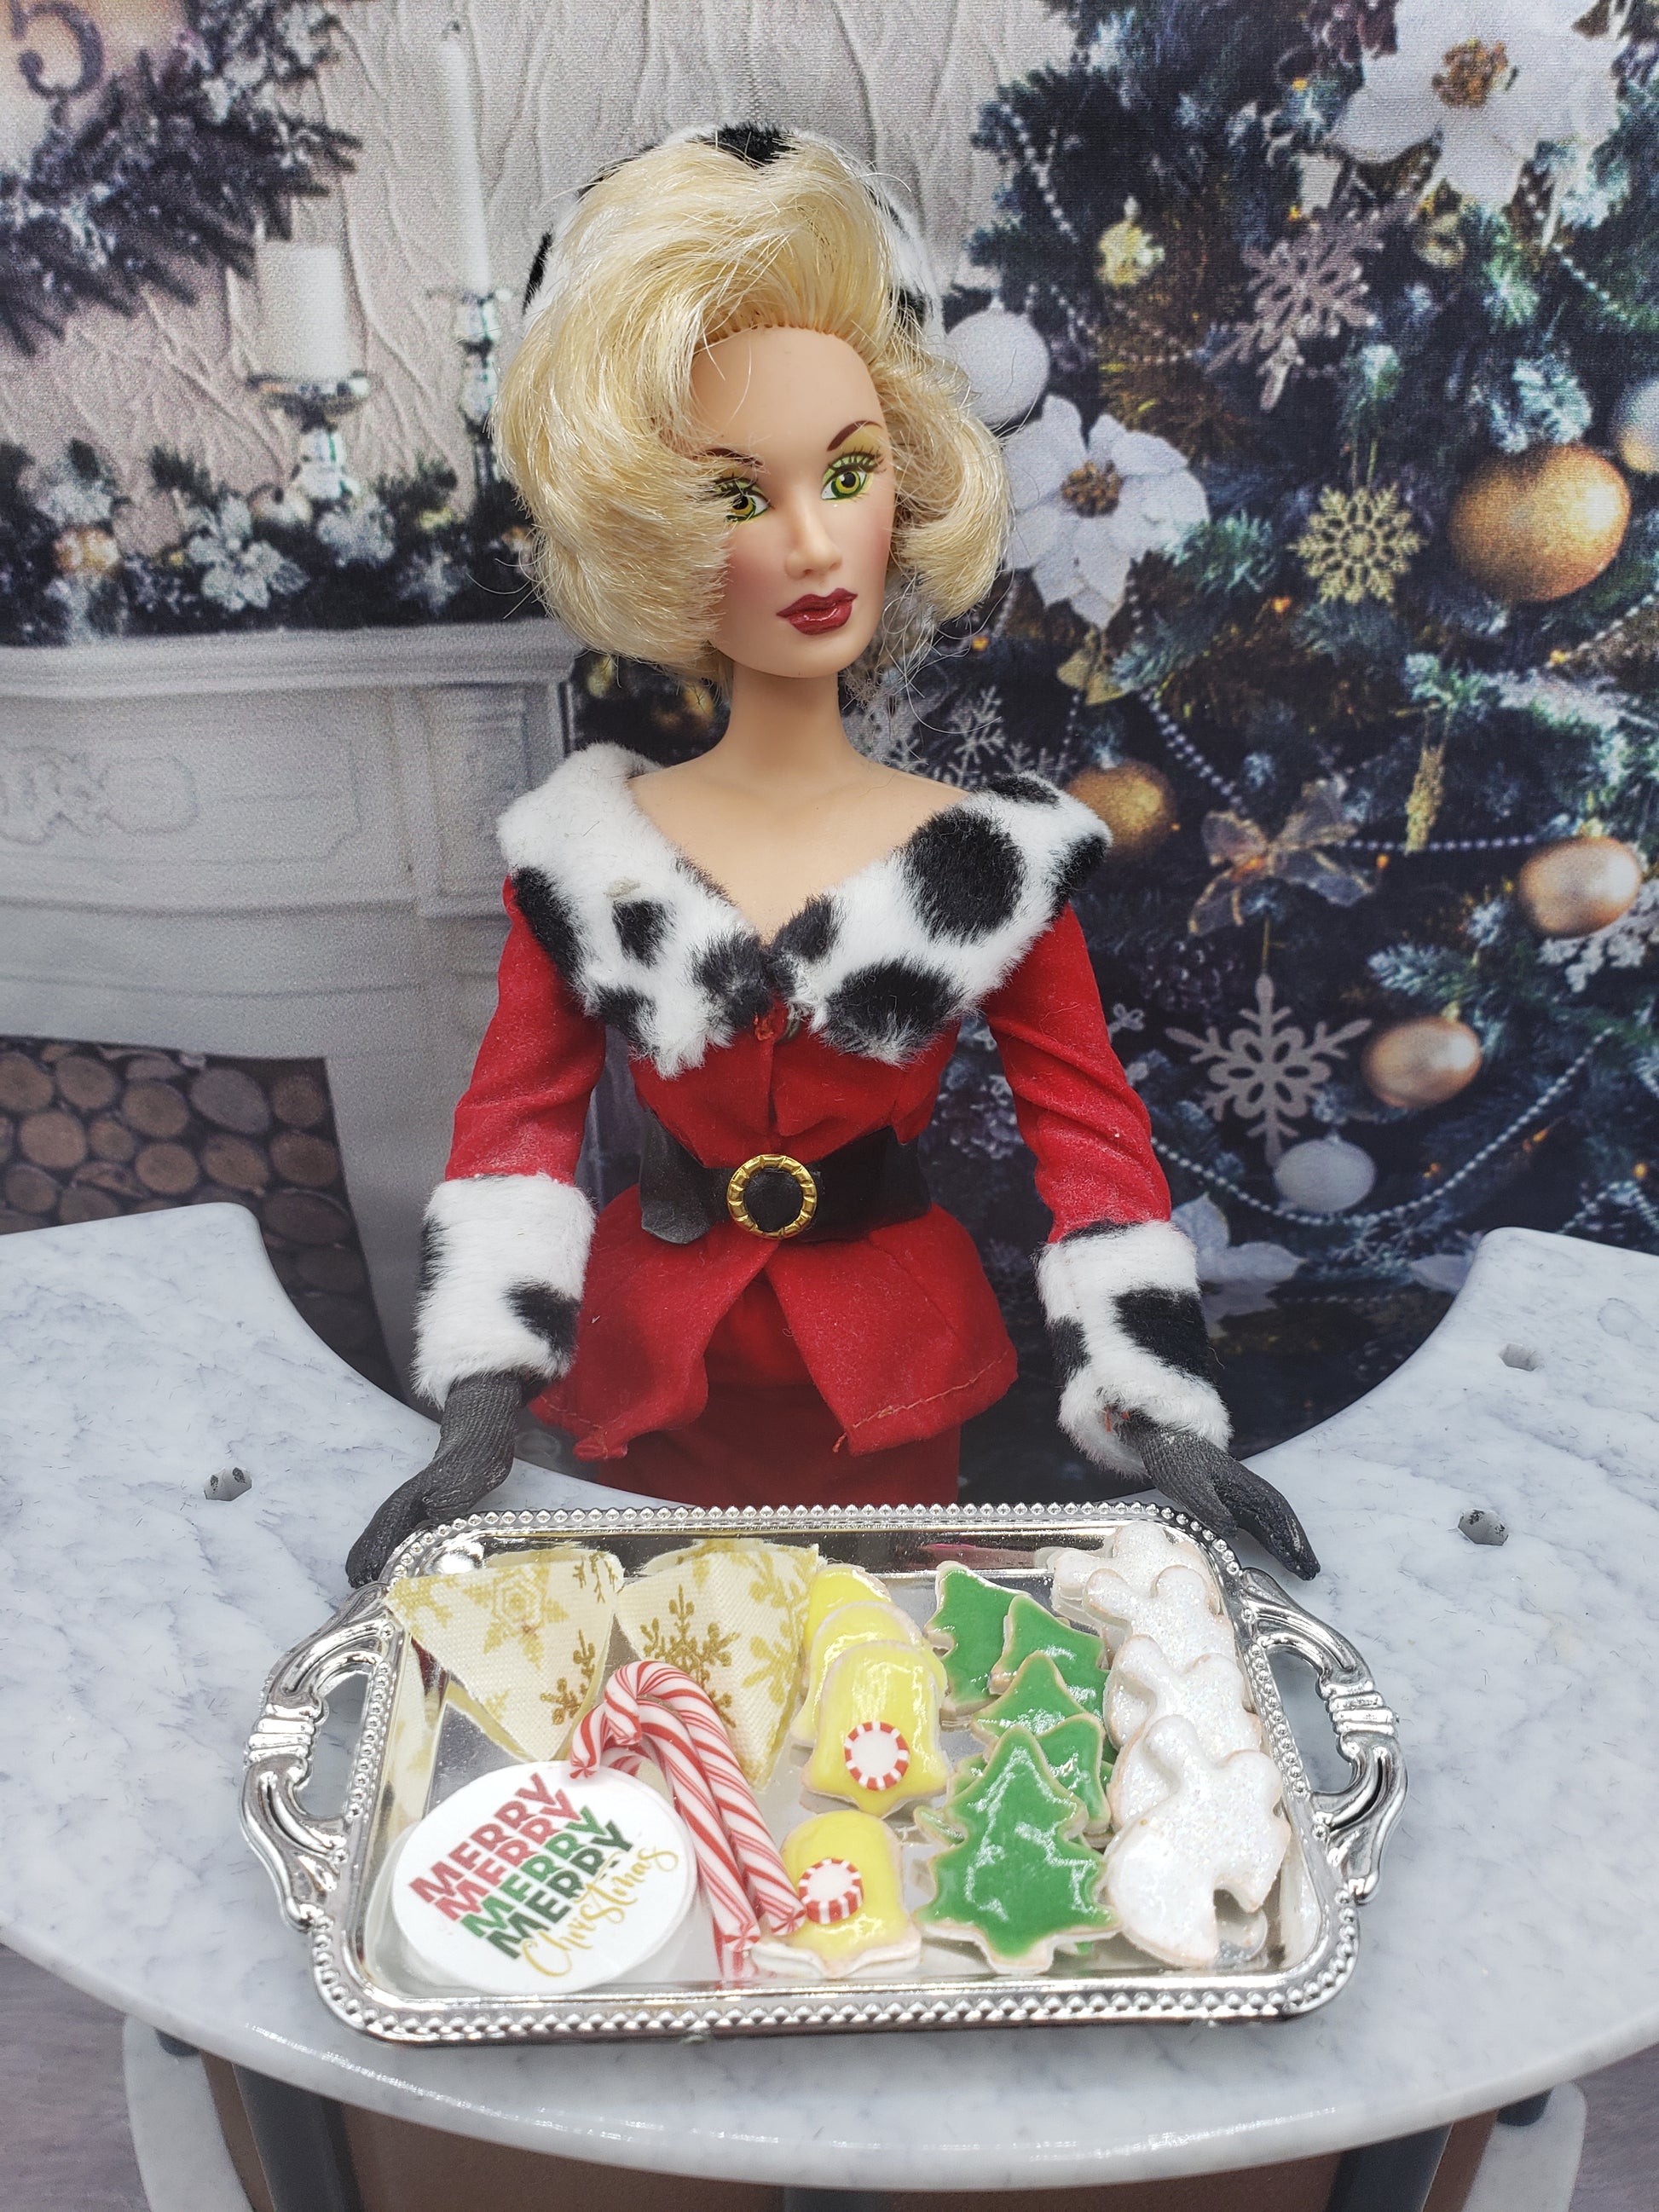 Barbie with a Christmas Cookie Tray